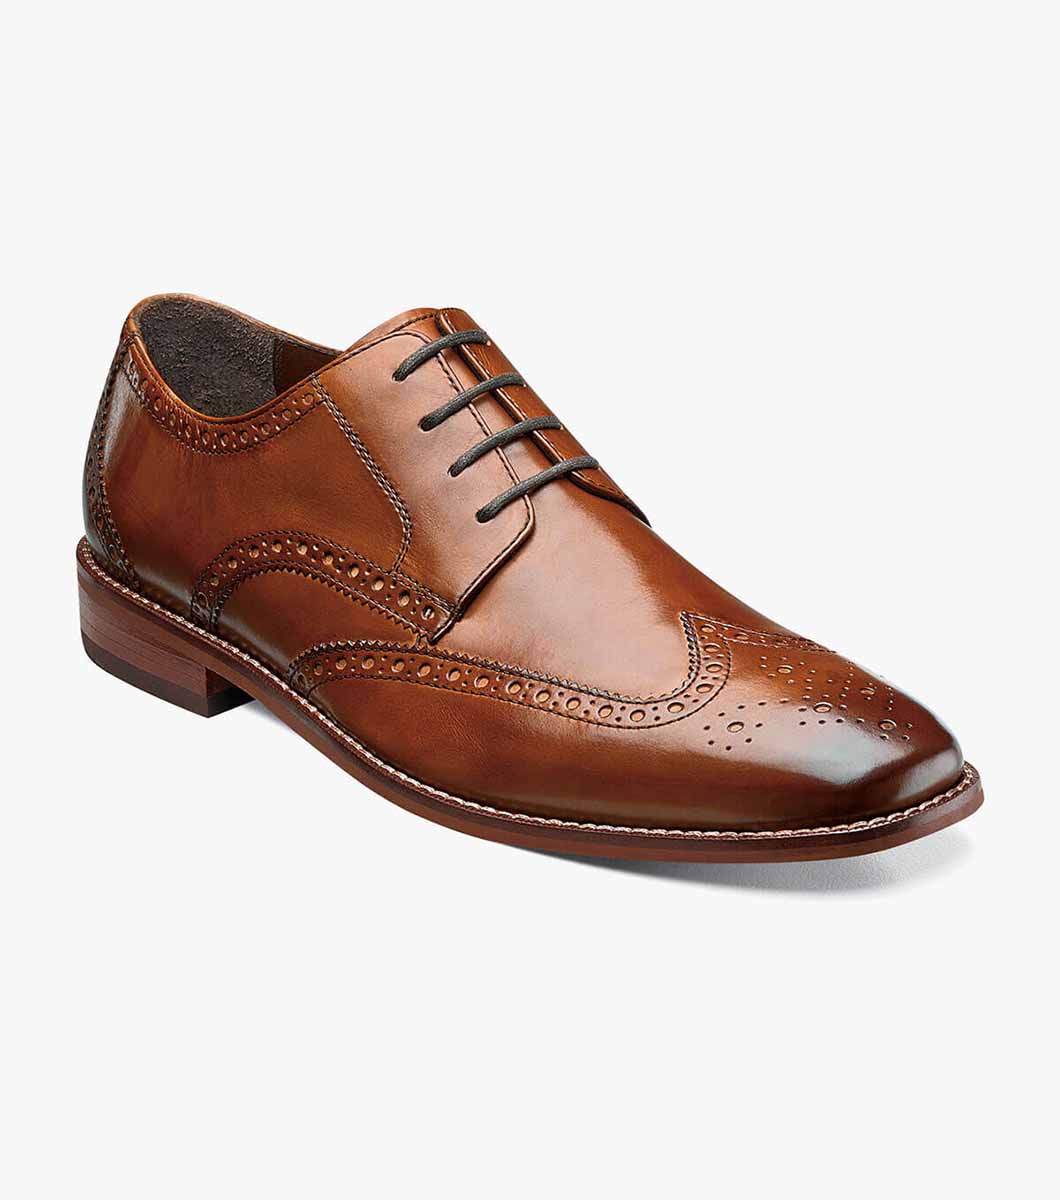 Castellano Wing Tip Leather Dress Oxford